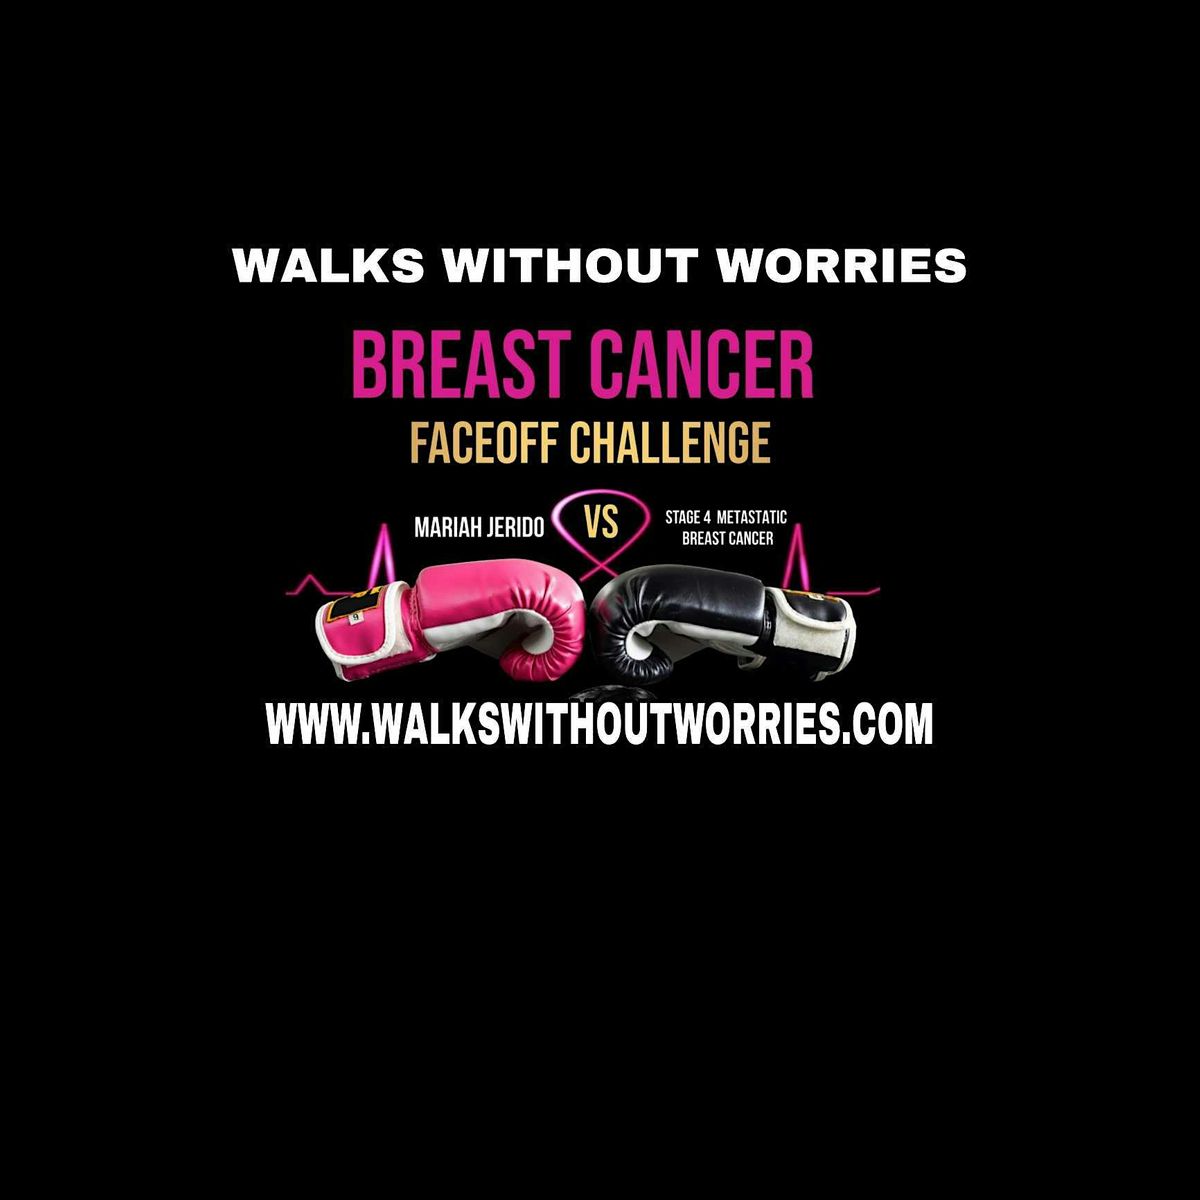 Walks Without Worries Breast Cancer Awareness Event